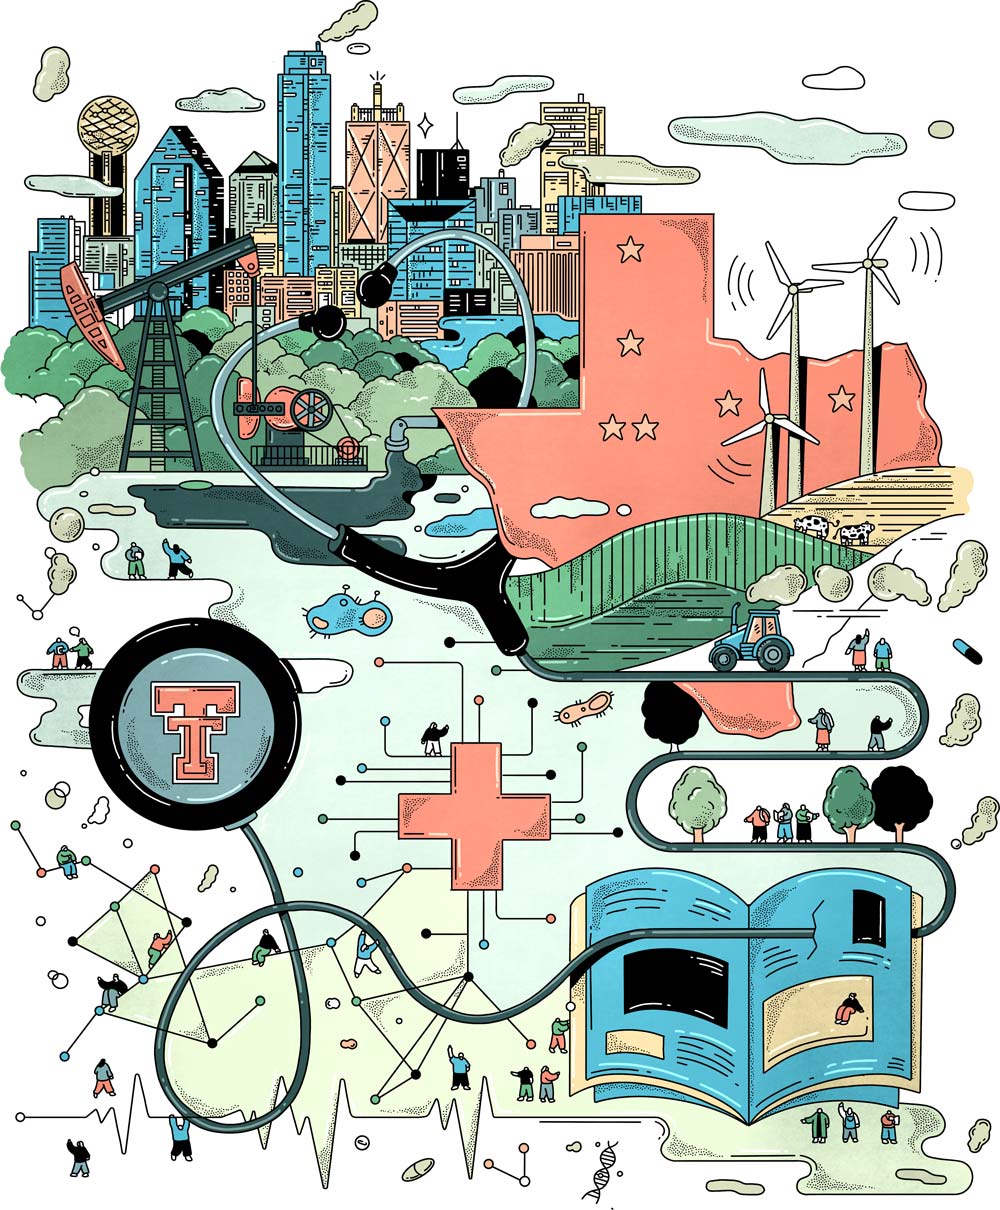 digital illustration of a Texas Tech logo on a stethoscope with the state of Texas, a skyline, windmills, and a magazine